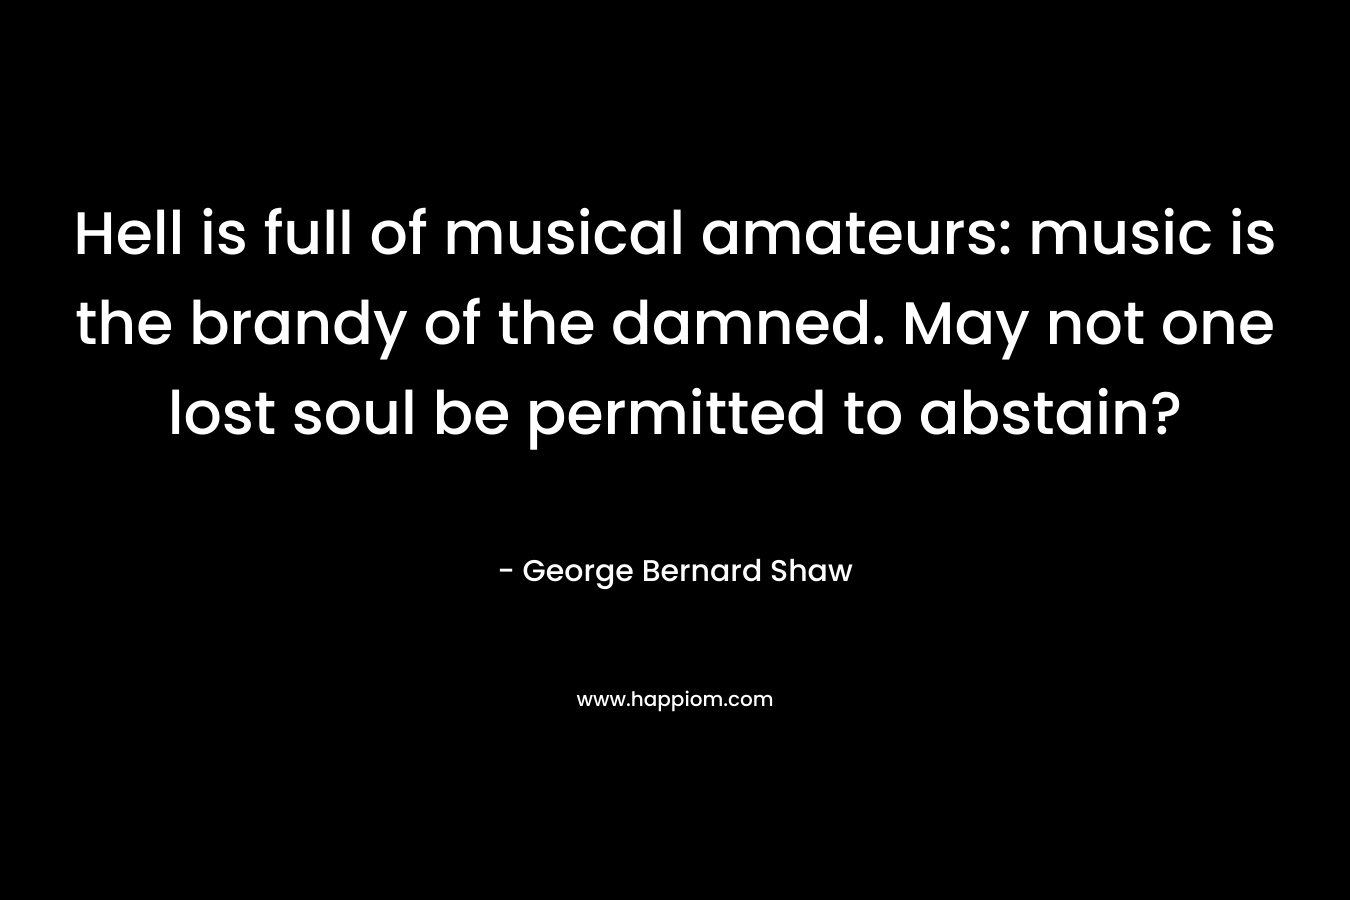 Hell is full of musical amateurs: music is the brandy of the damned. May not one lost soul be permitted to abstain? – George Bernard Shaw